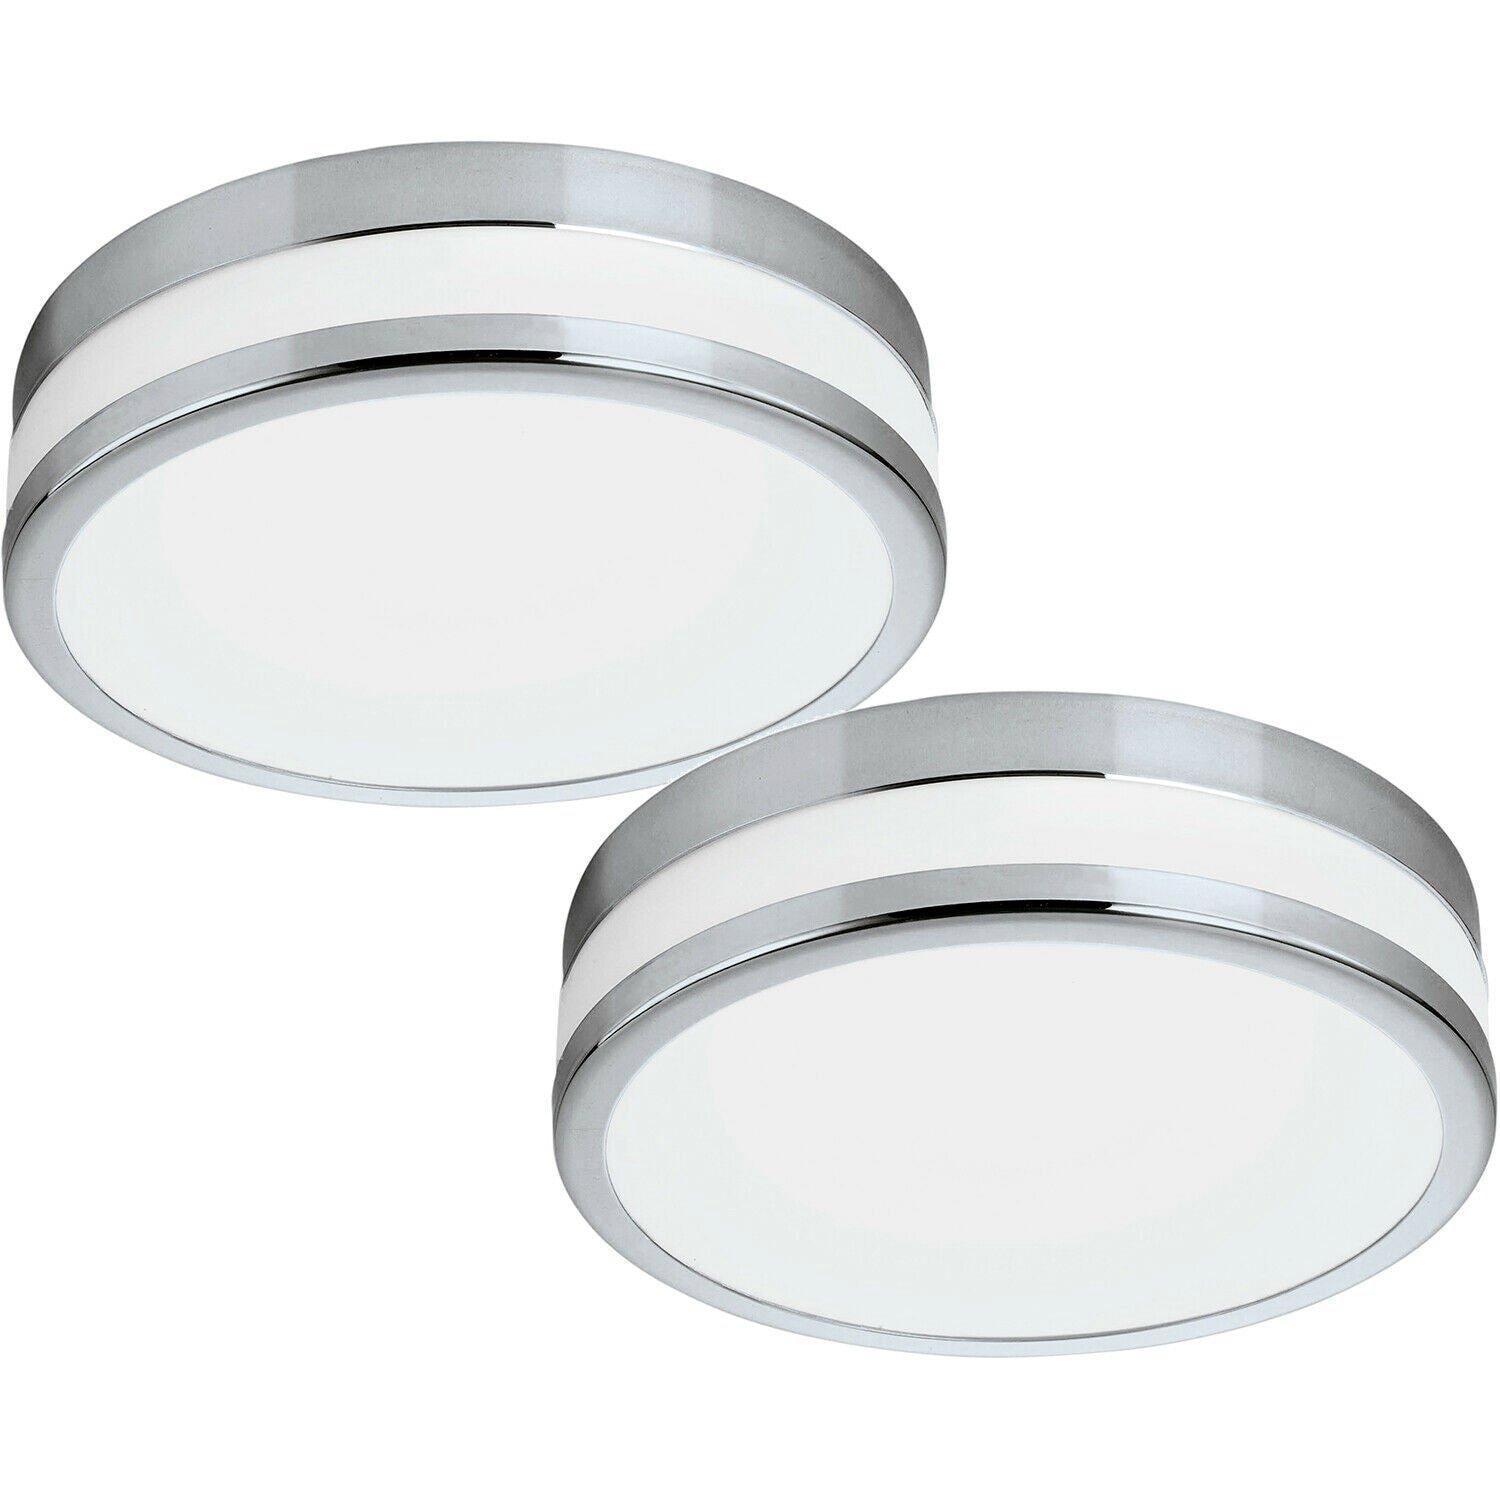 2 PACK Wall Flush Ceiling Light IP44 Chrome White Painted Glass Shade LED 24W